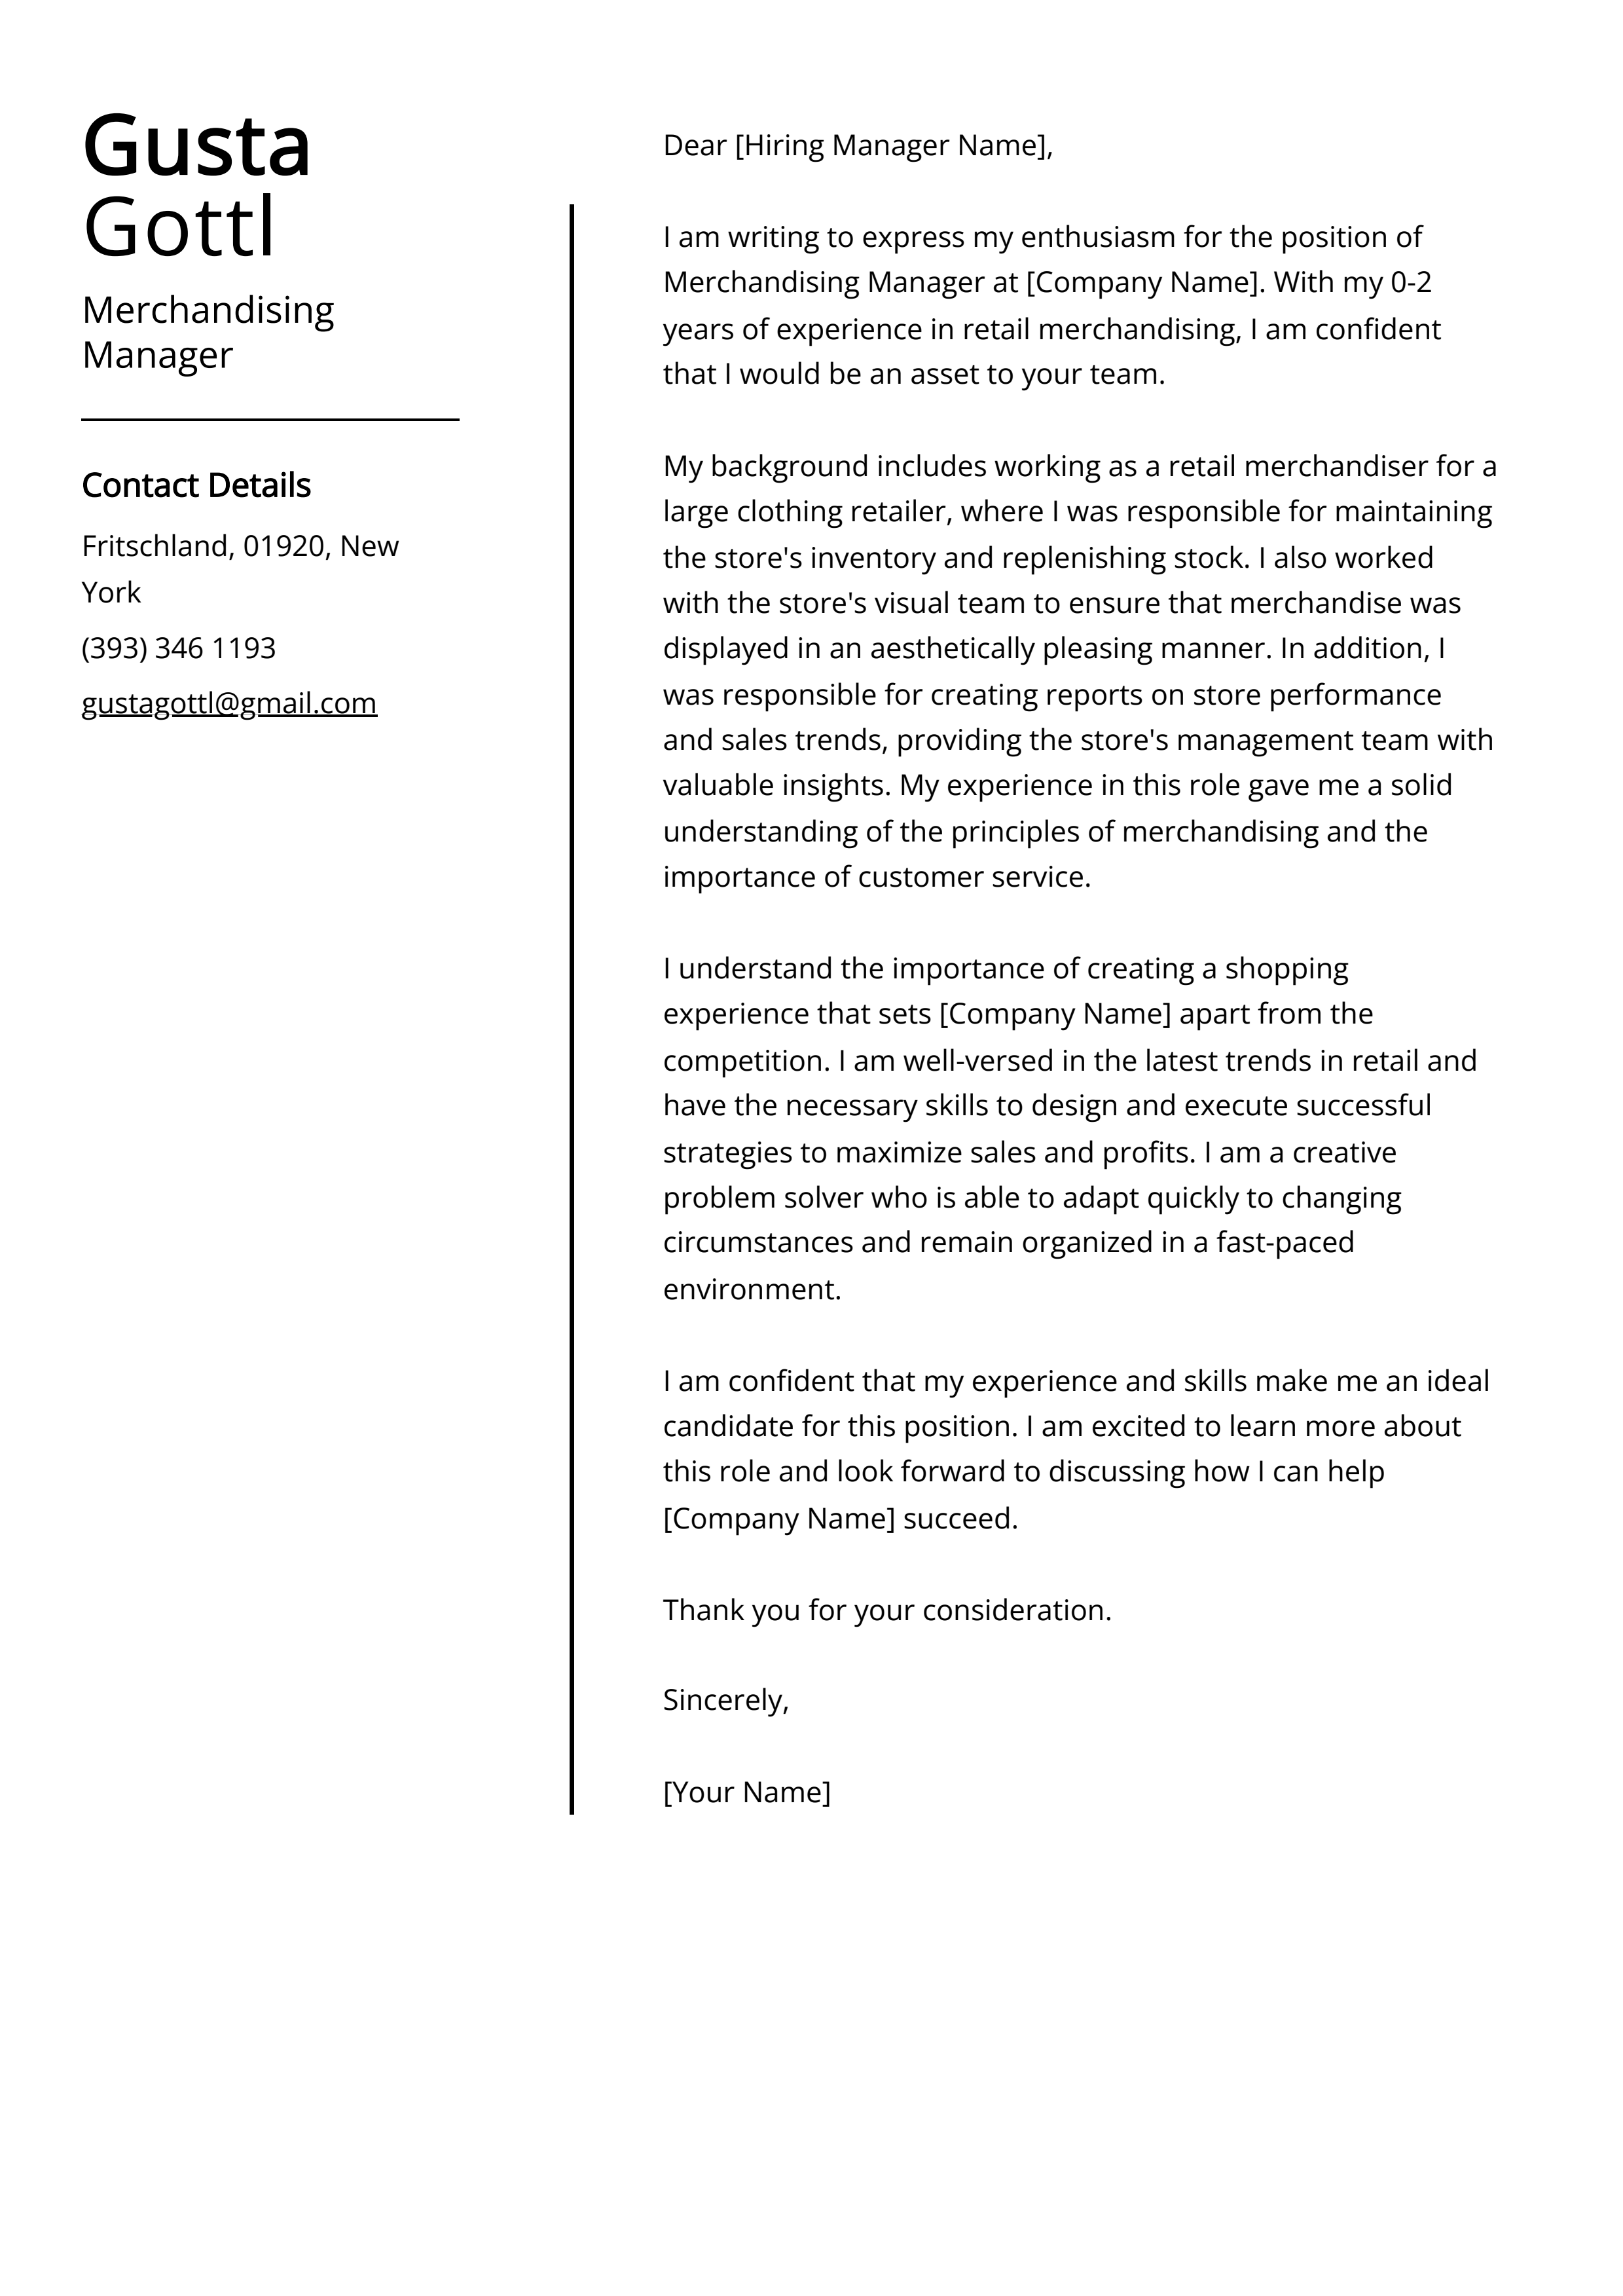 Merchandising Manager Cover Letter Example